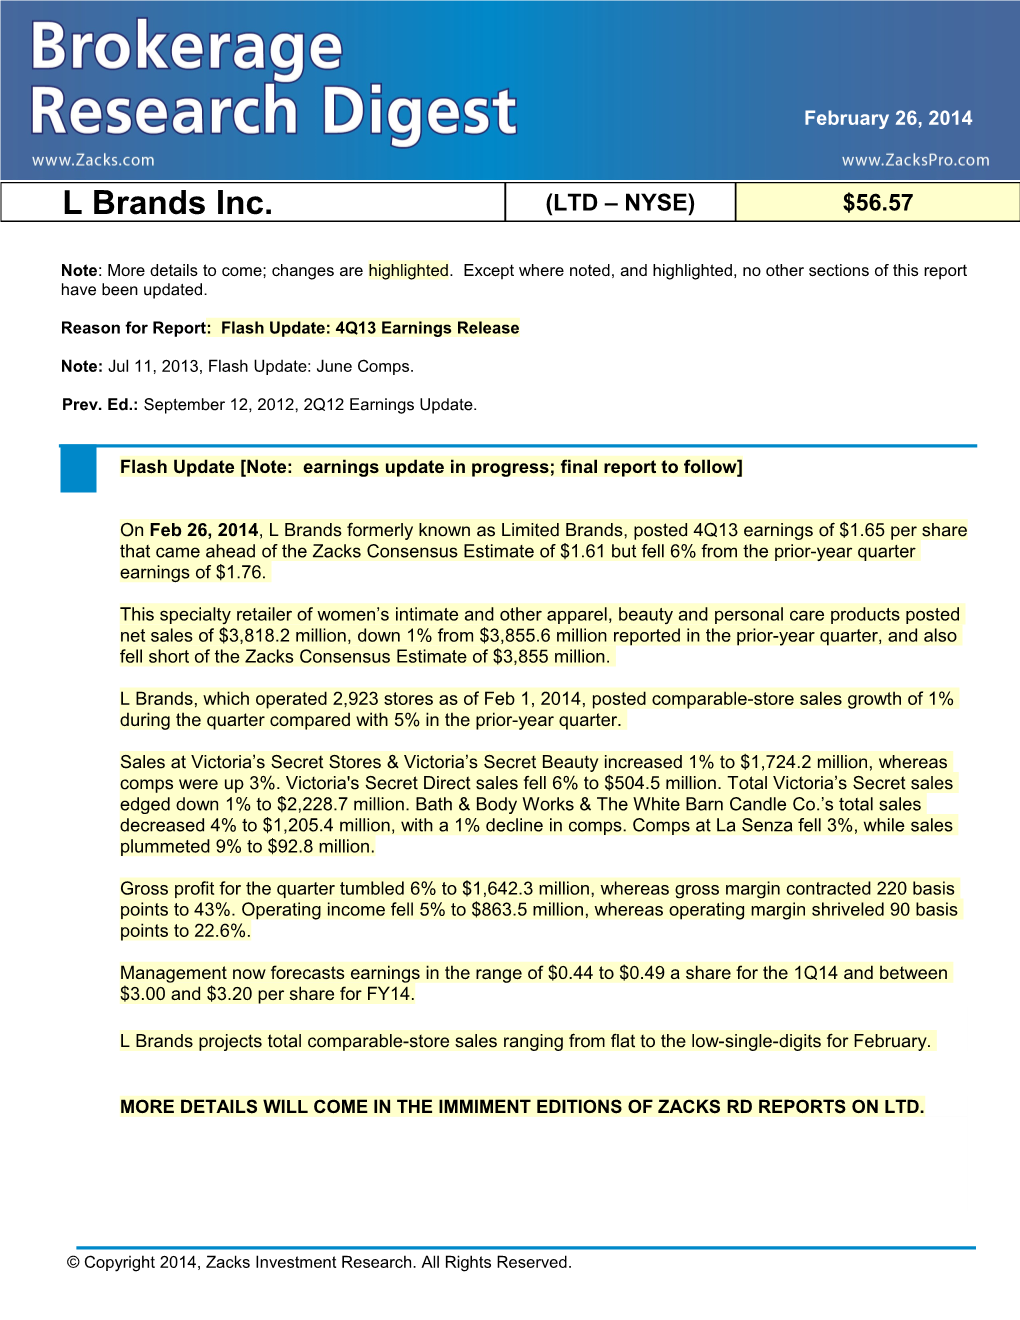 Reason for Report: Flash Update: 4Q13 Earnings Release